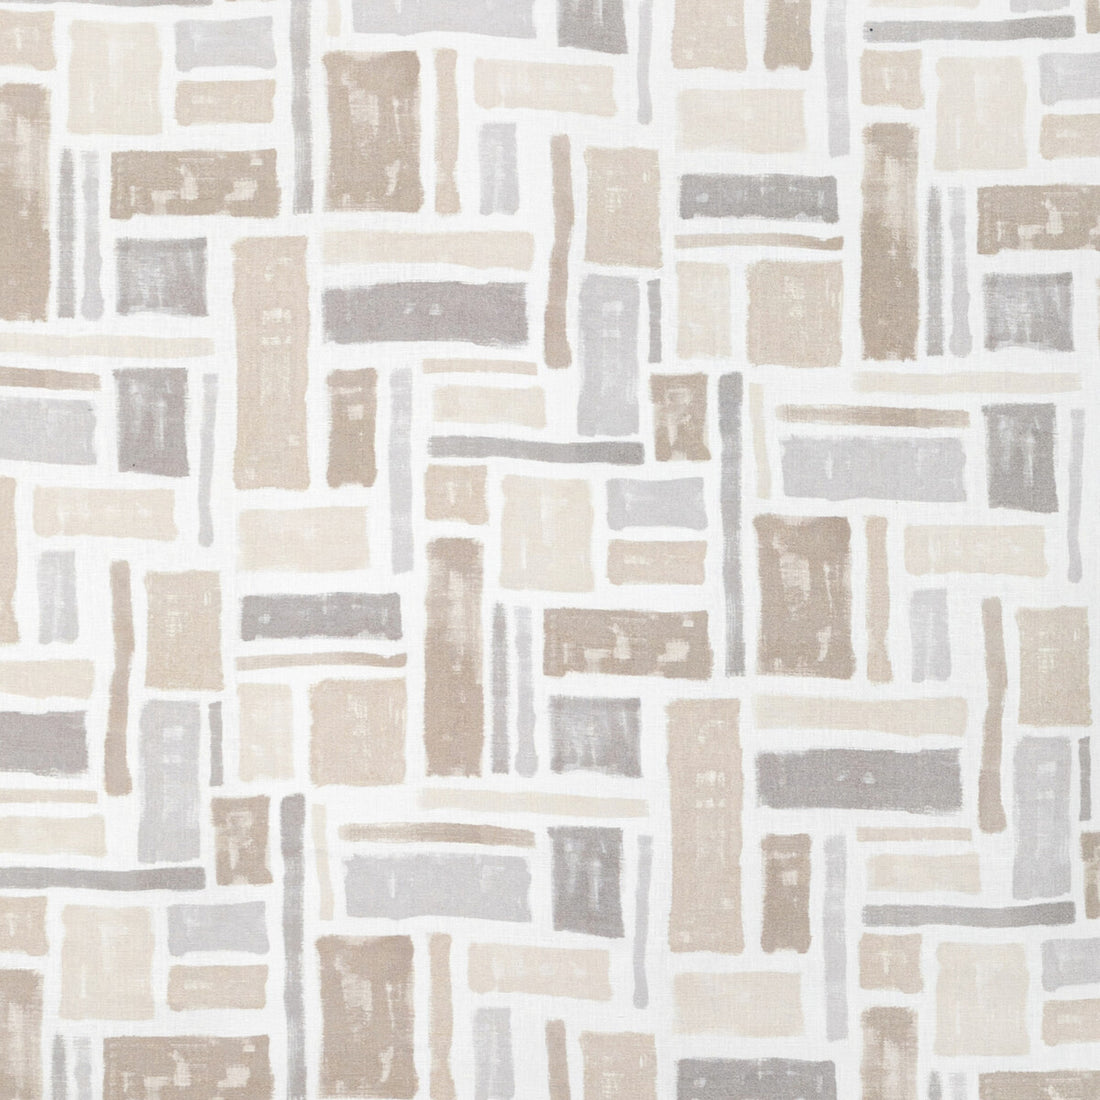 Partington fabric in sand color - pattern PARTINGTON.16.0 - by Kravet Design in the Jeffrey Alan Marks Seascapes collection